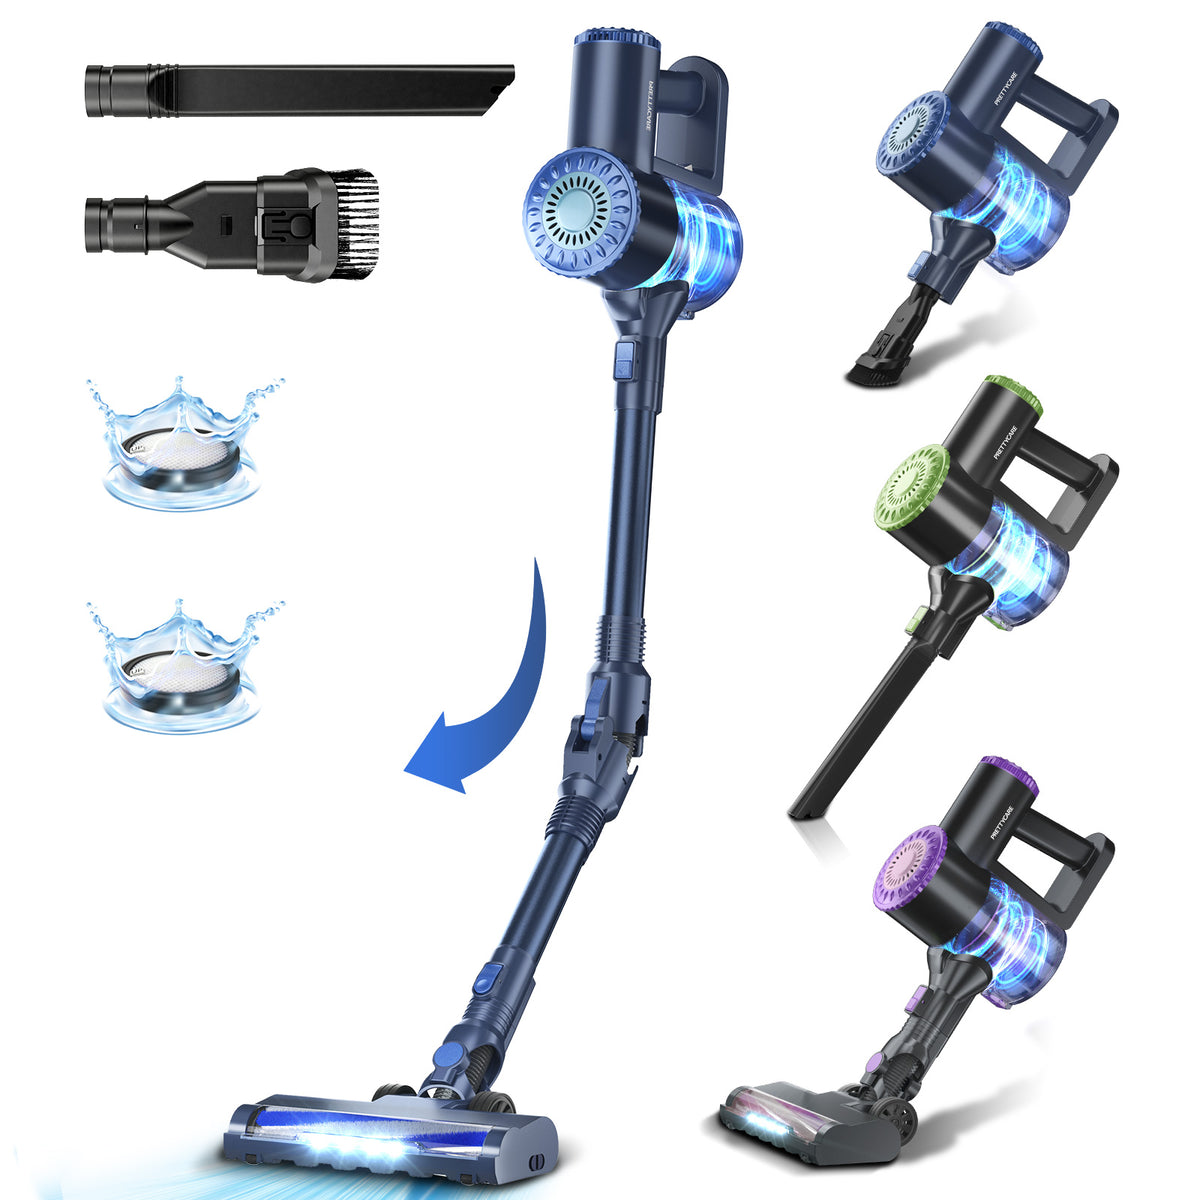 Prettycare W400 Cordless Vacuum Cleaner Review HD 1080p 